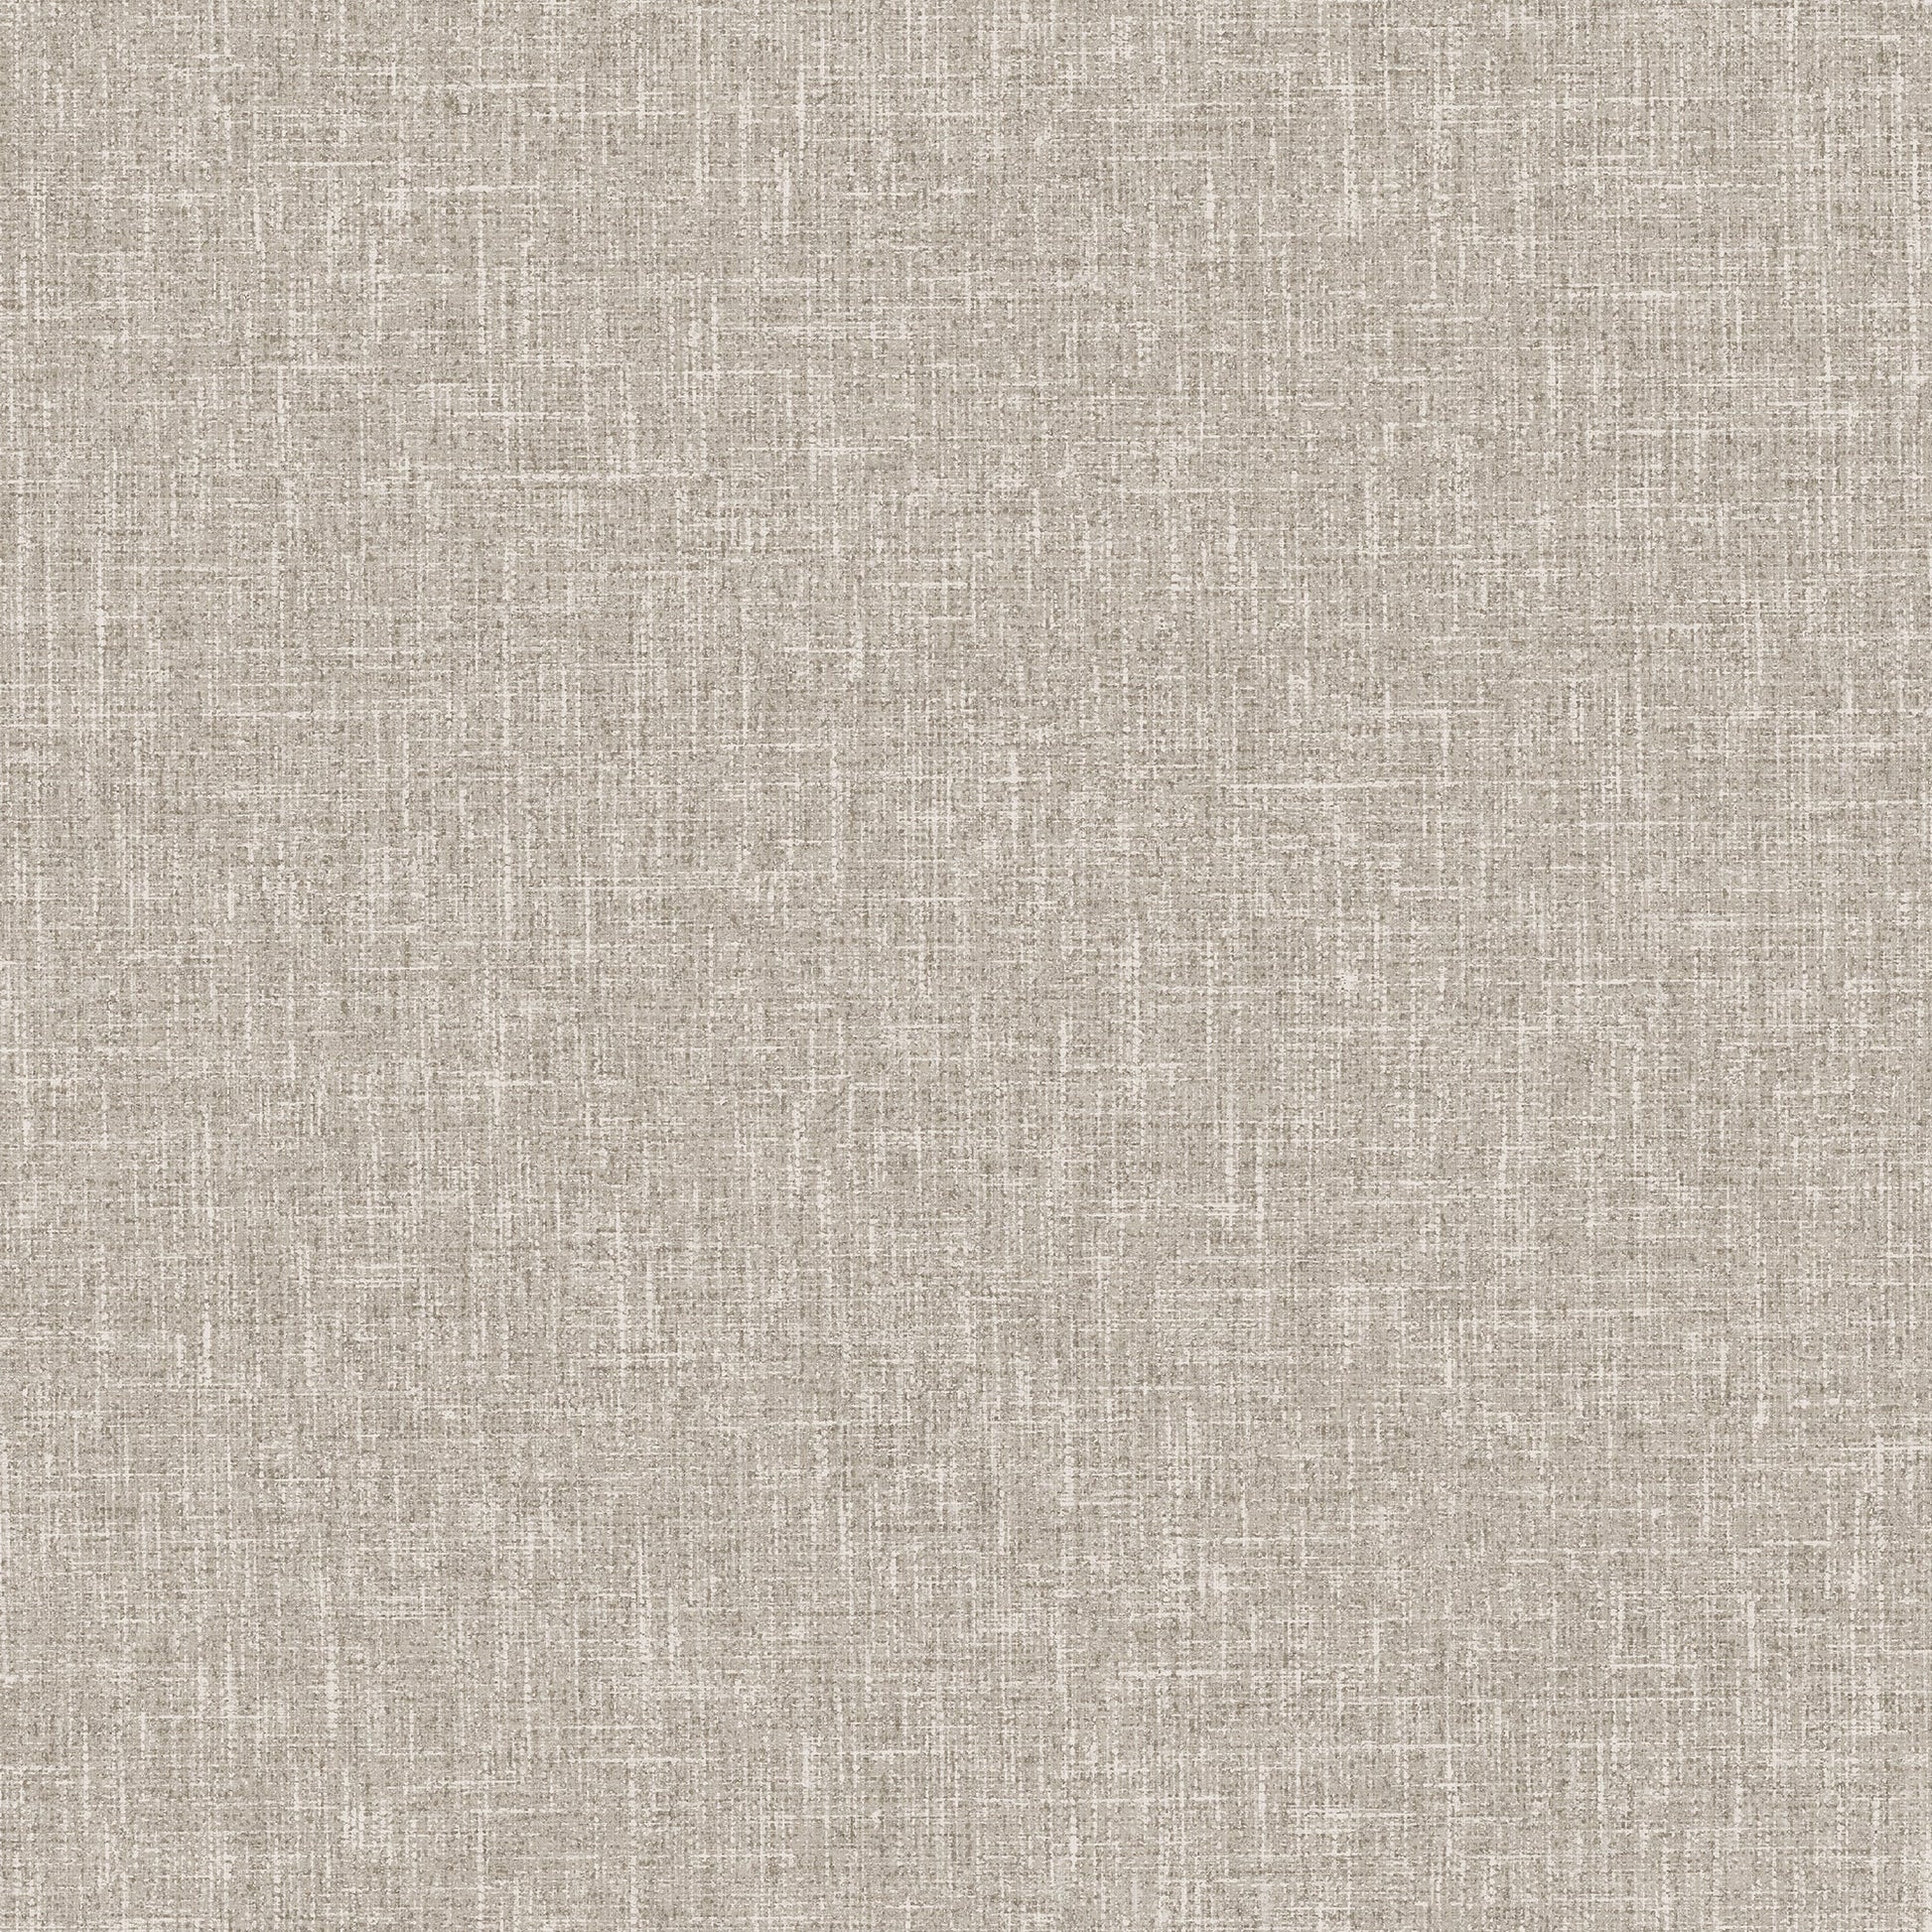 Country Plain Wallpaper 295003 by Arthouse